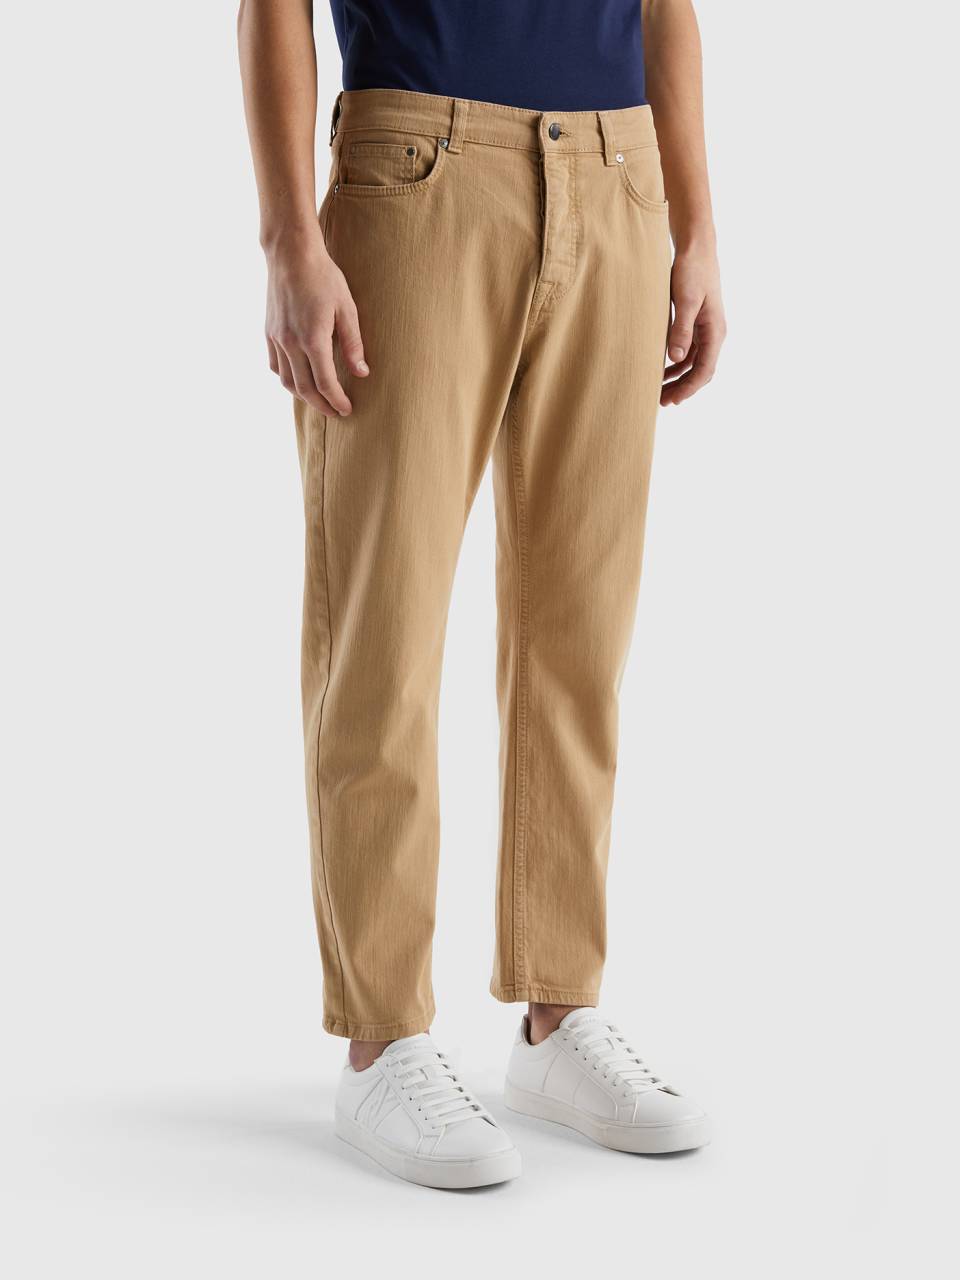 Be Stylish and Comfortable with Carrot Pants